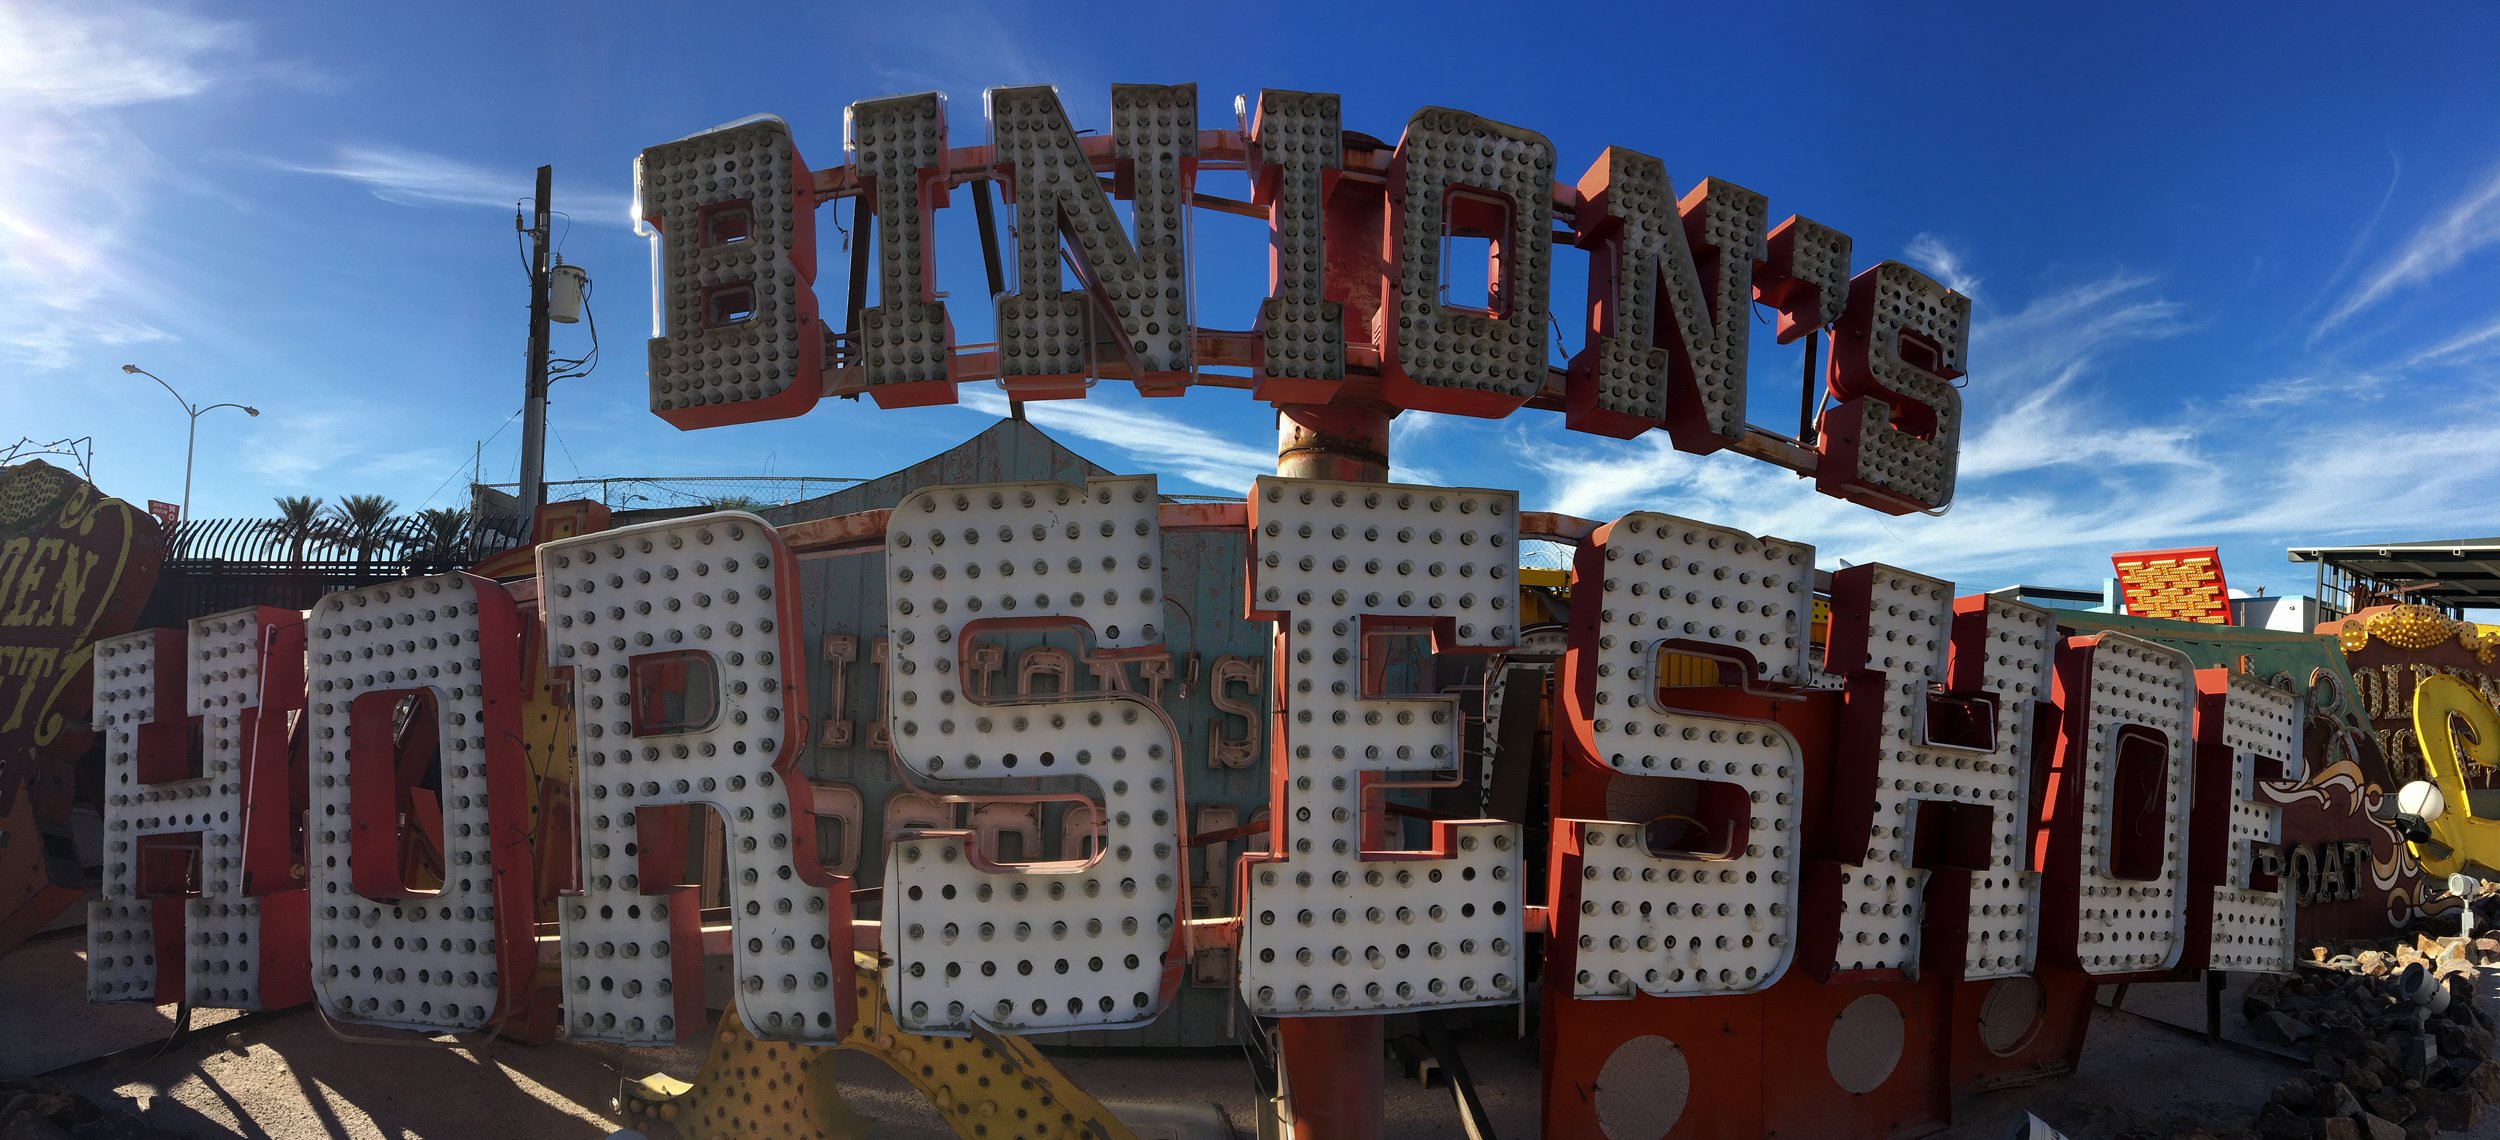 Landmark sign, Las Vegas, This sign, curated by the Neon Mu…